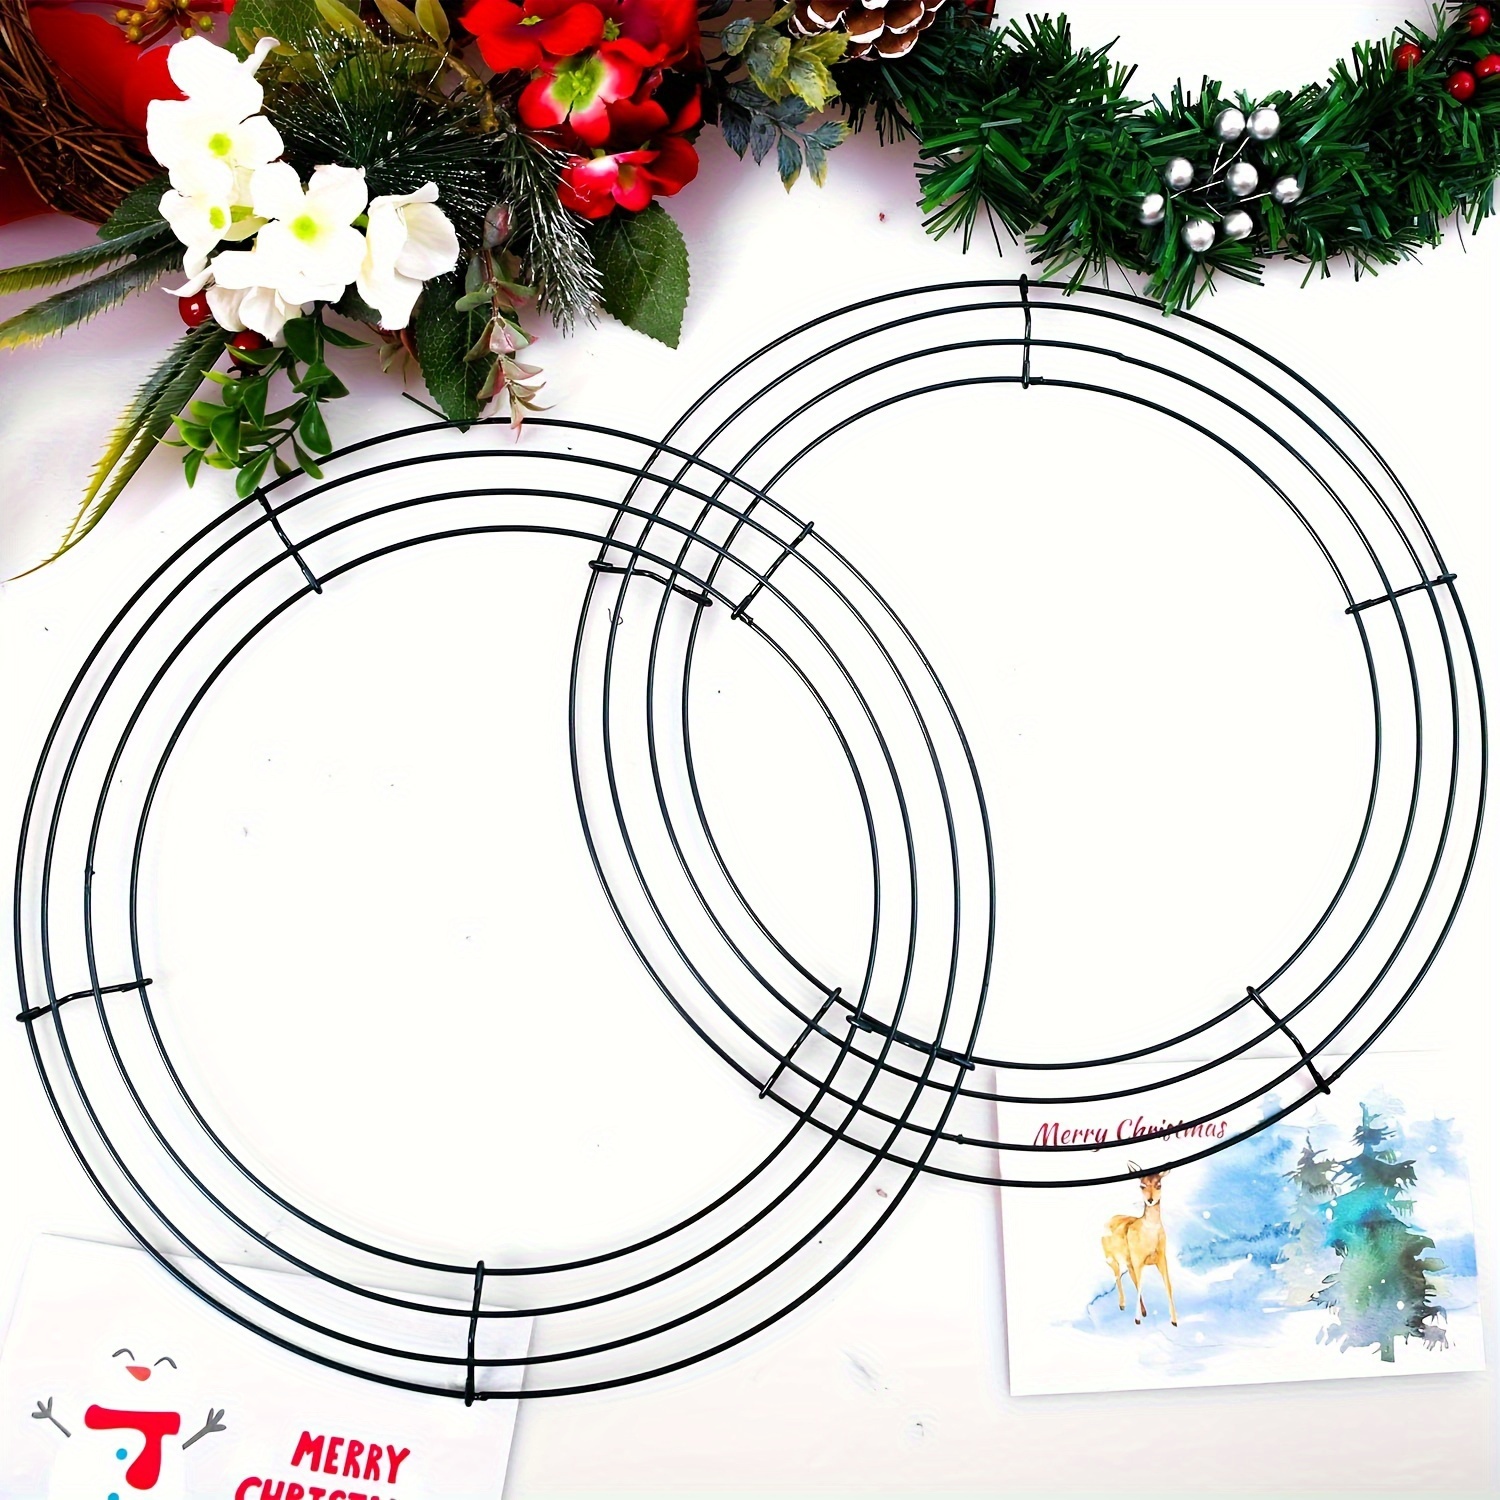 4 Pack Metal Wire Wreath Frame, Black Round Wreath Rings for DIY Floral Crafts, Christmas Wedding Holidays Valentines Garden Home Door Wall Party